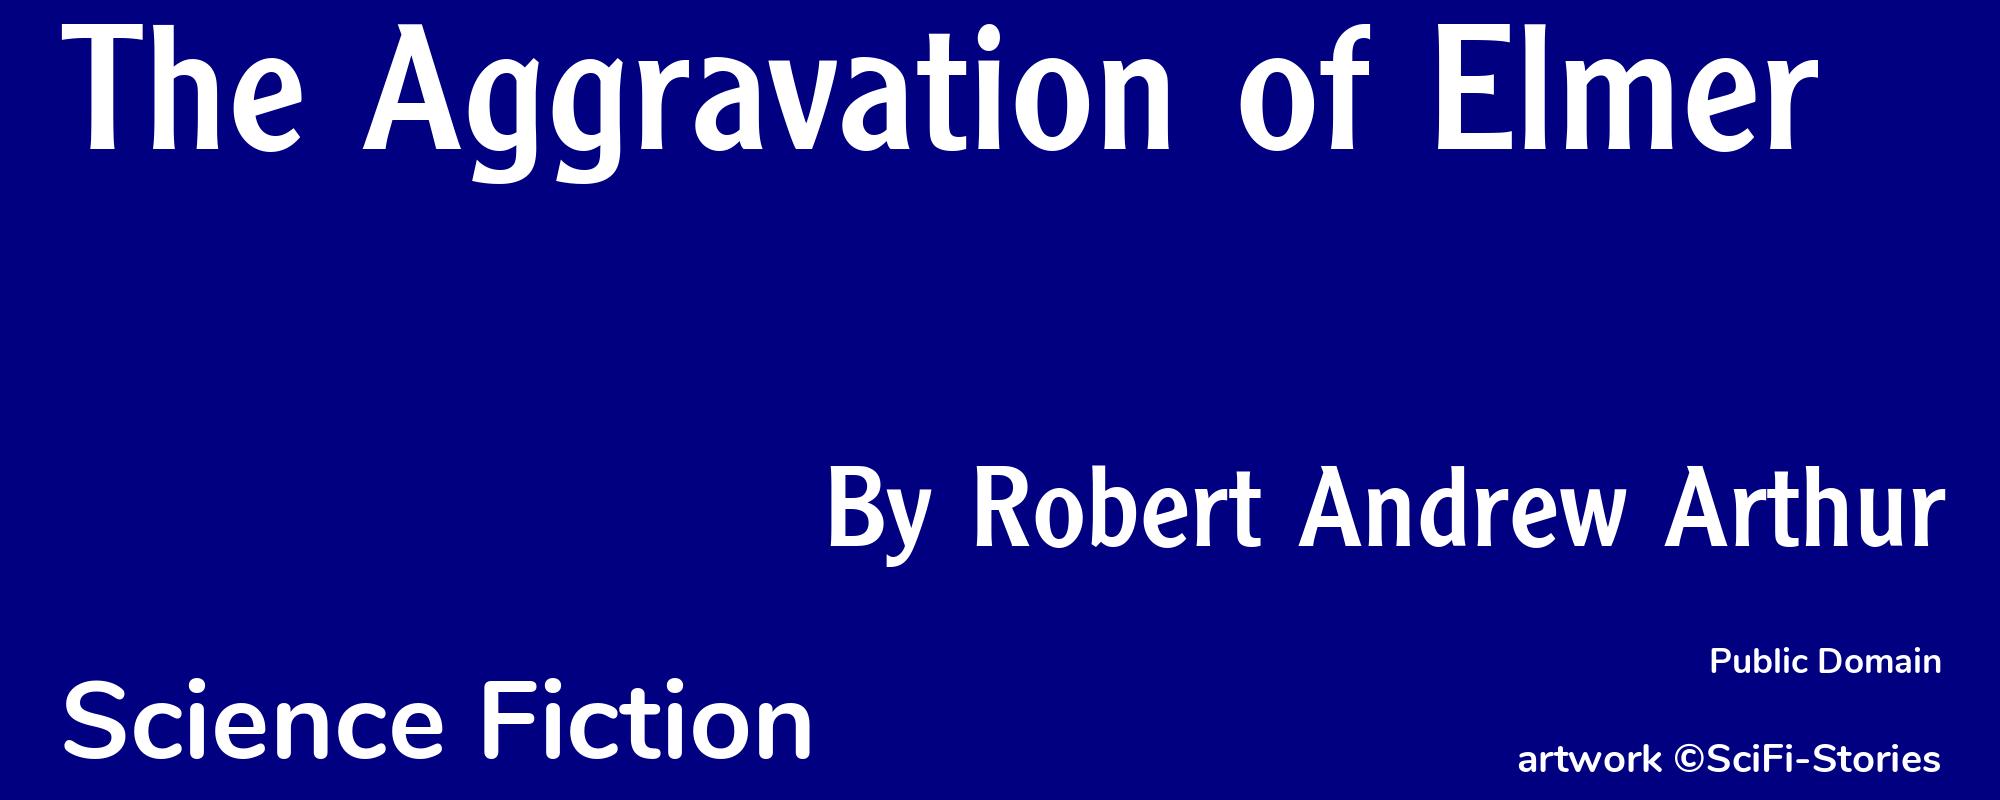 The Aggravation of Elmer - Cover